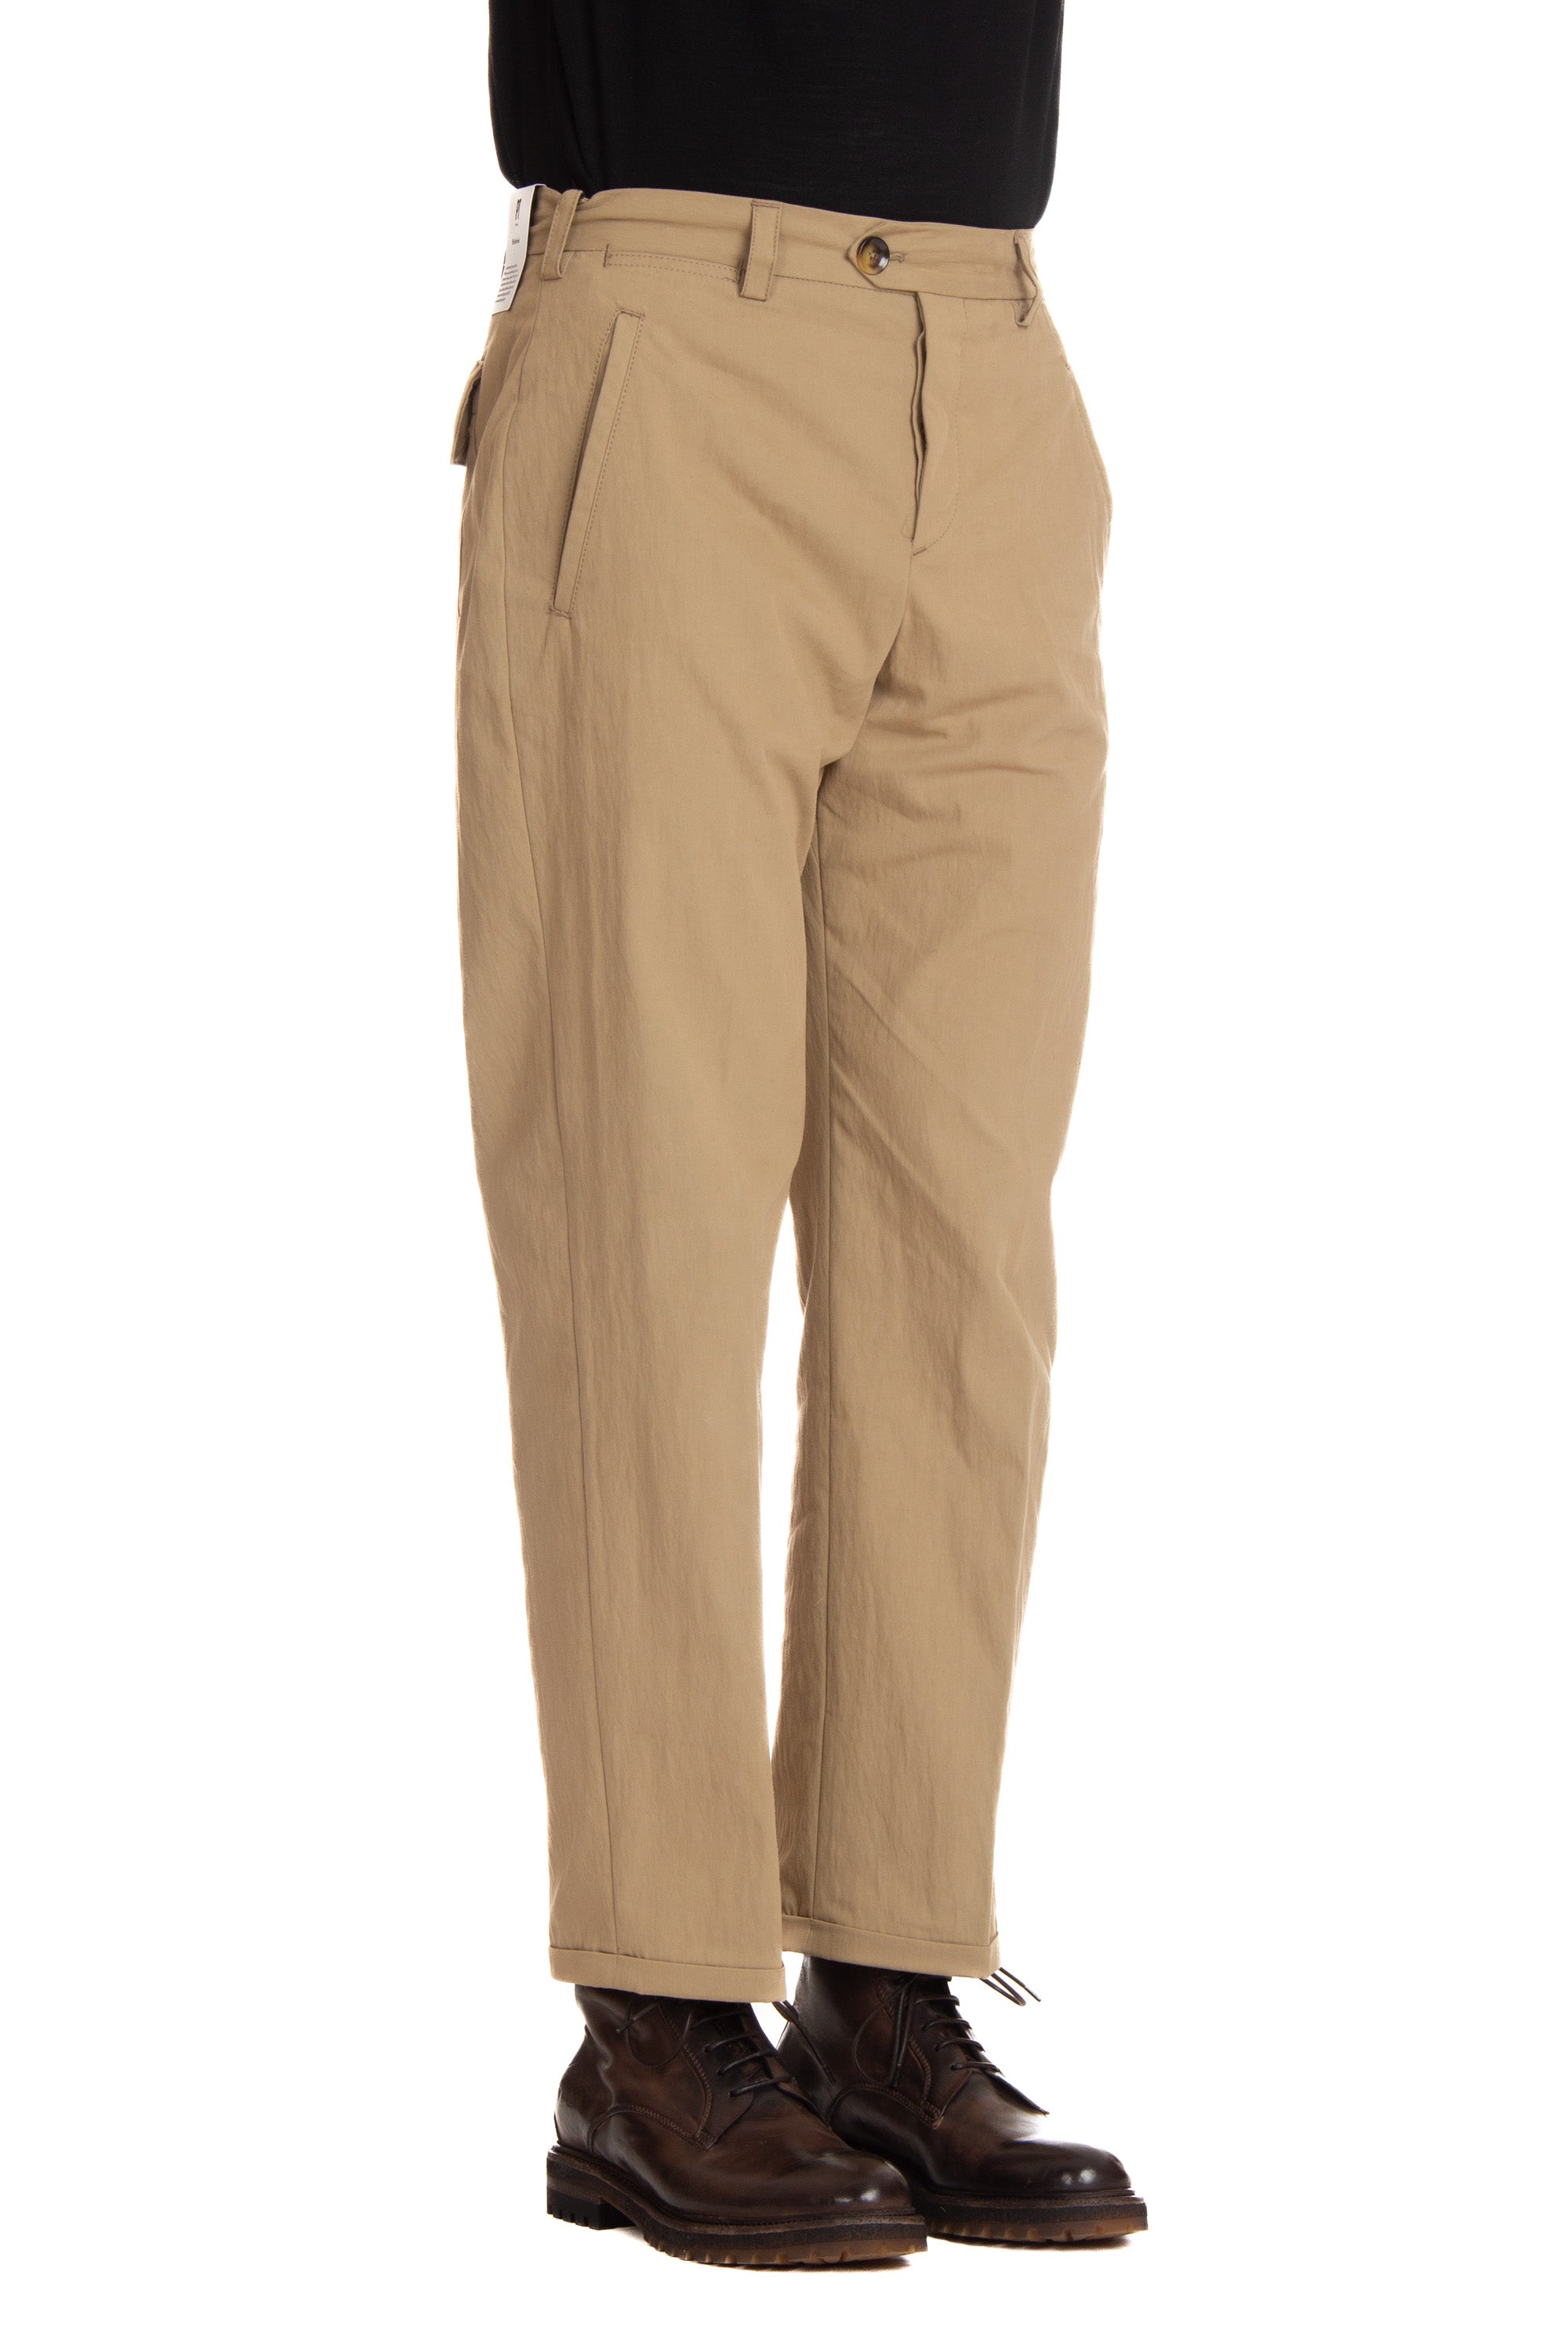 Winter poplin trousers from The Writer line